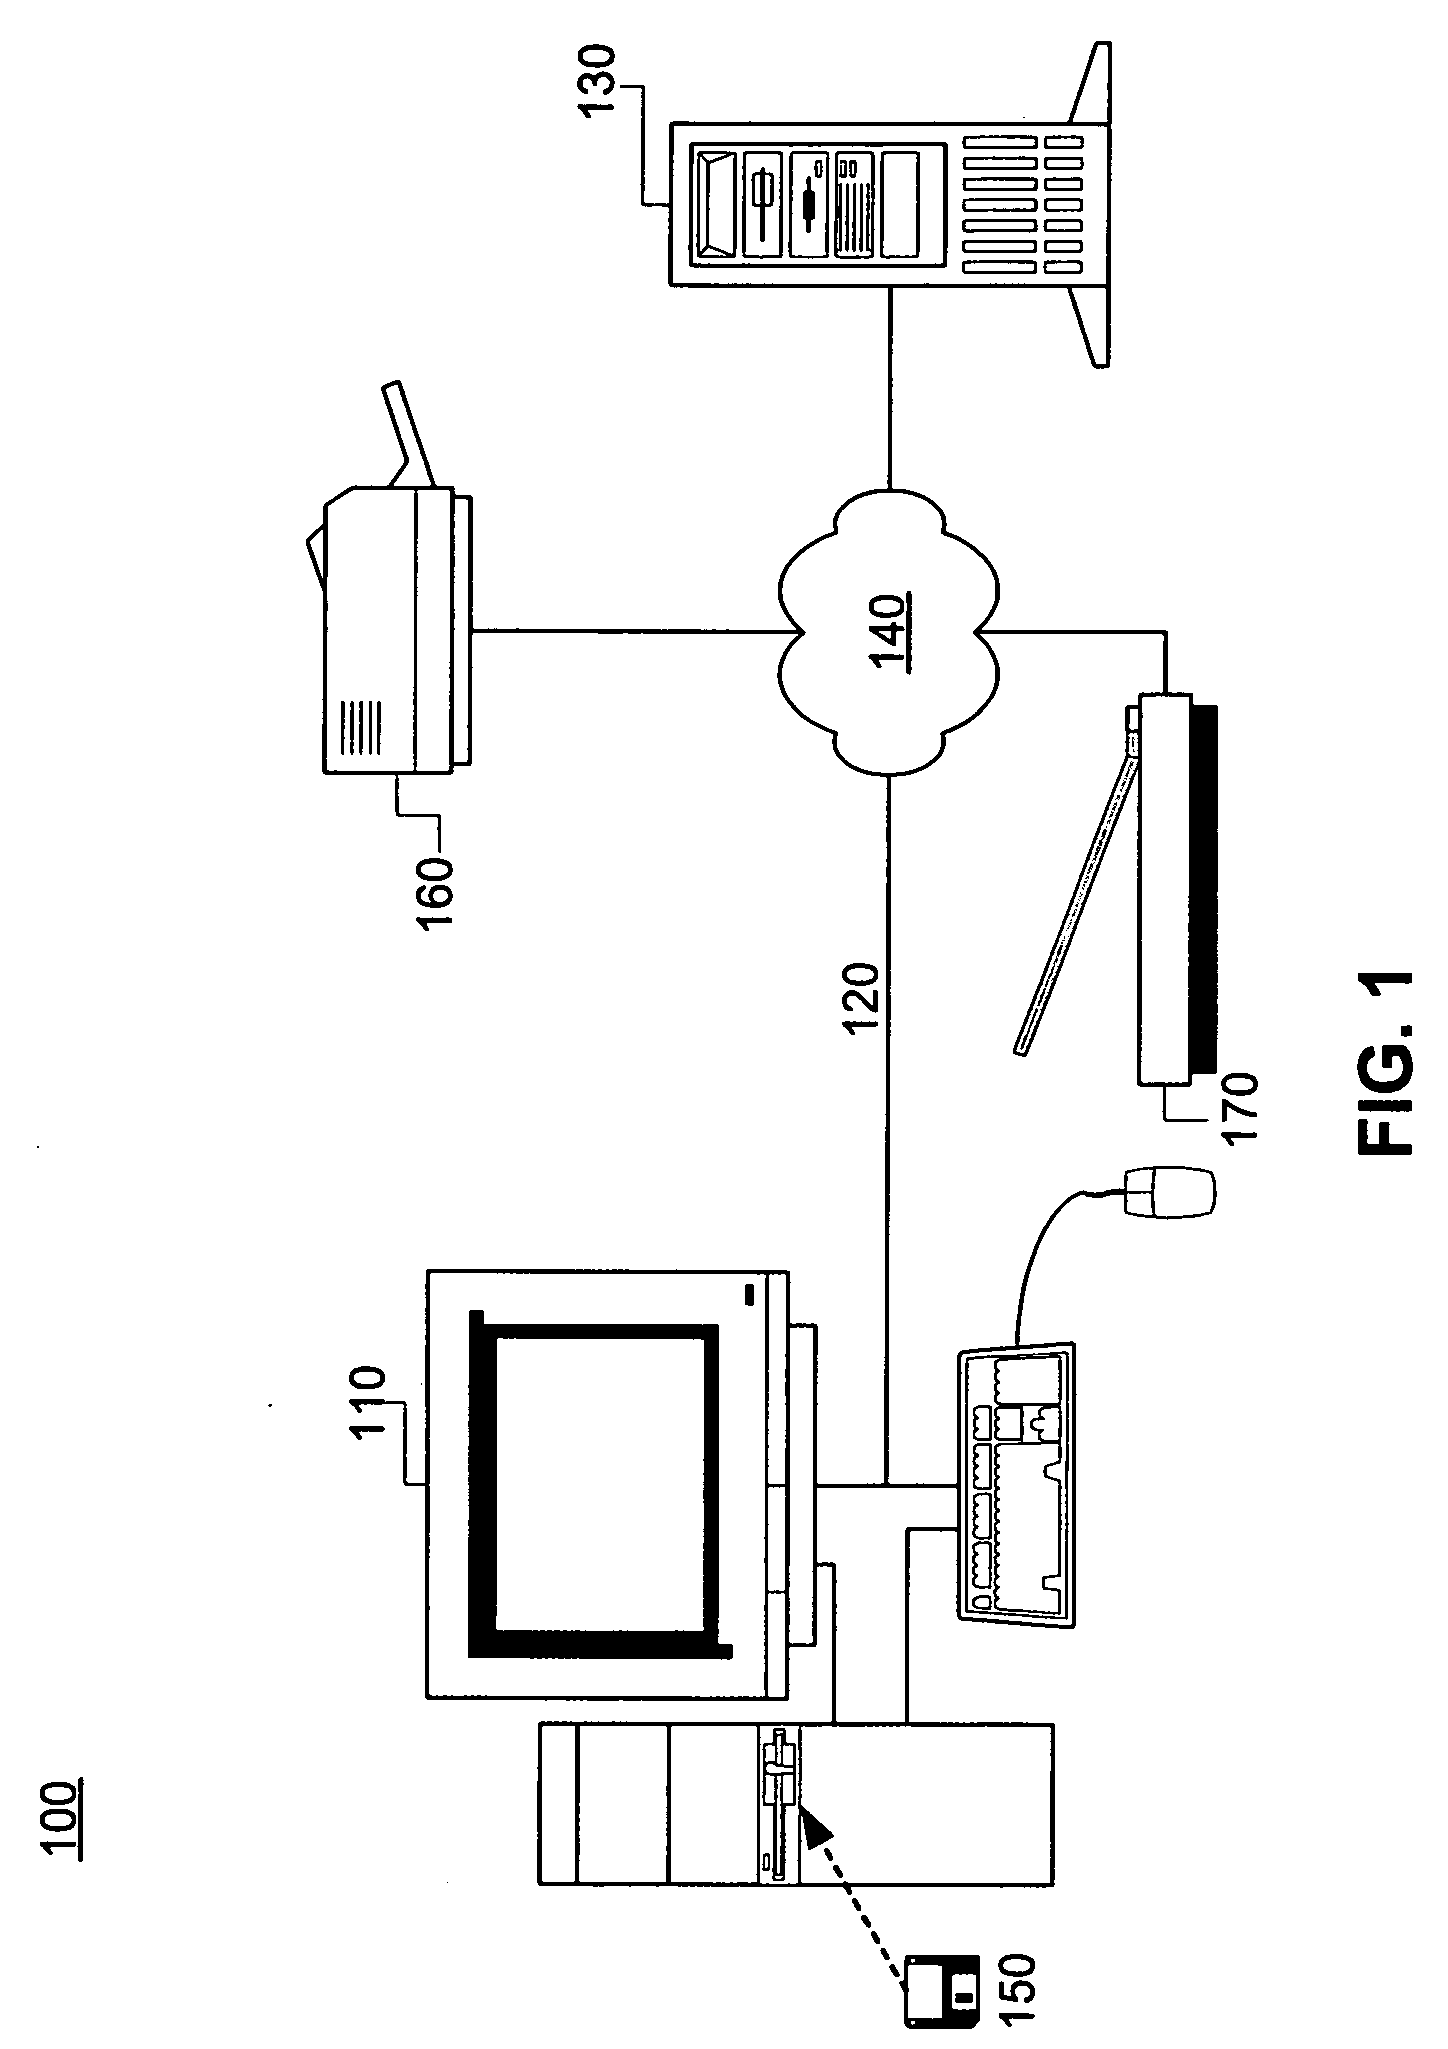 Systems and methods for preserving and maintaining document integrity